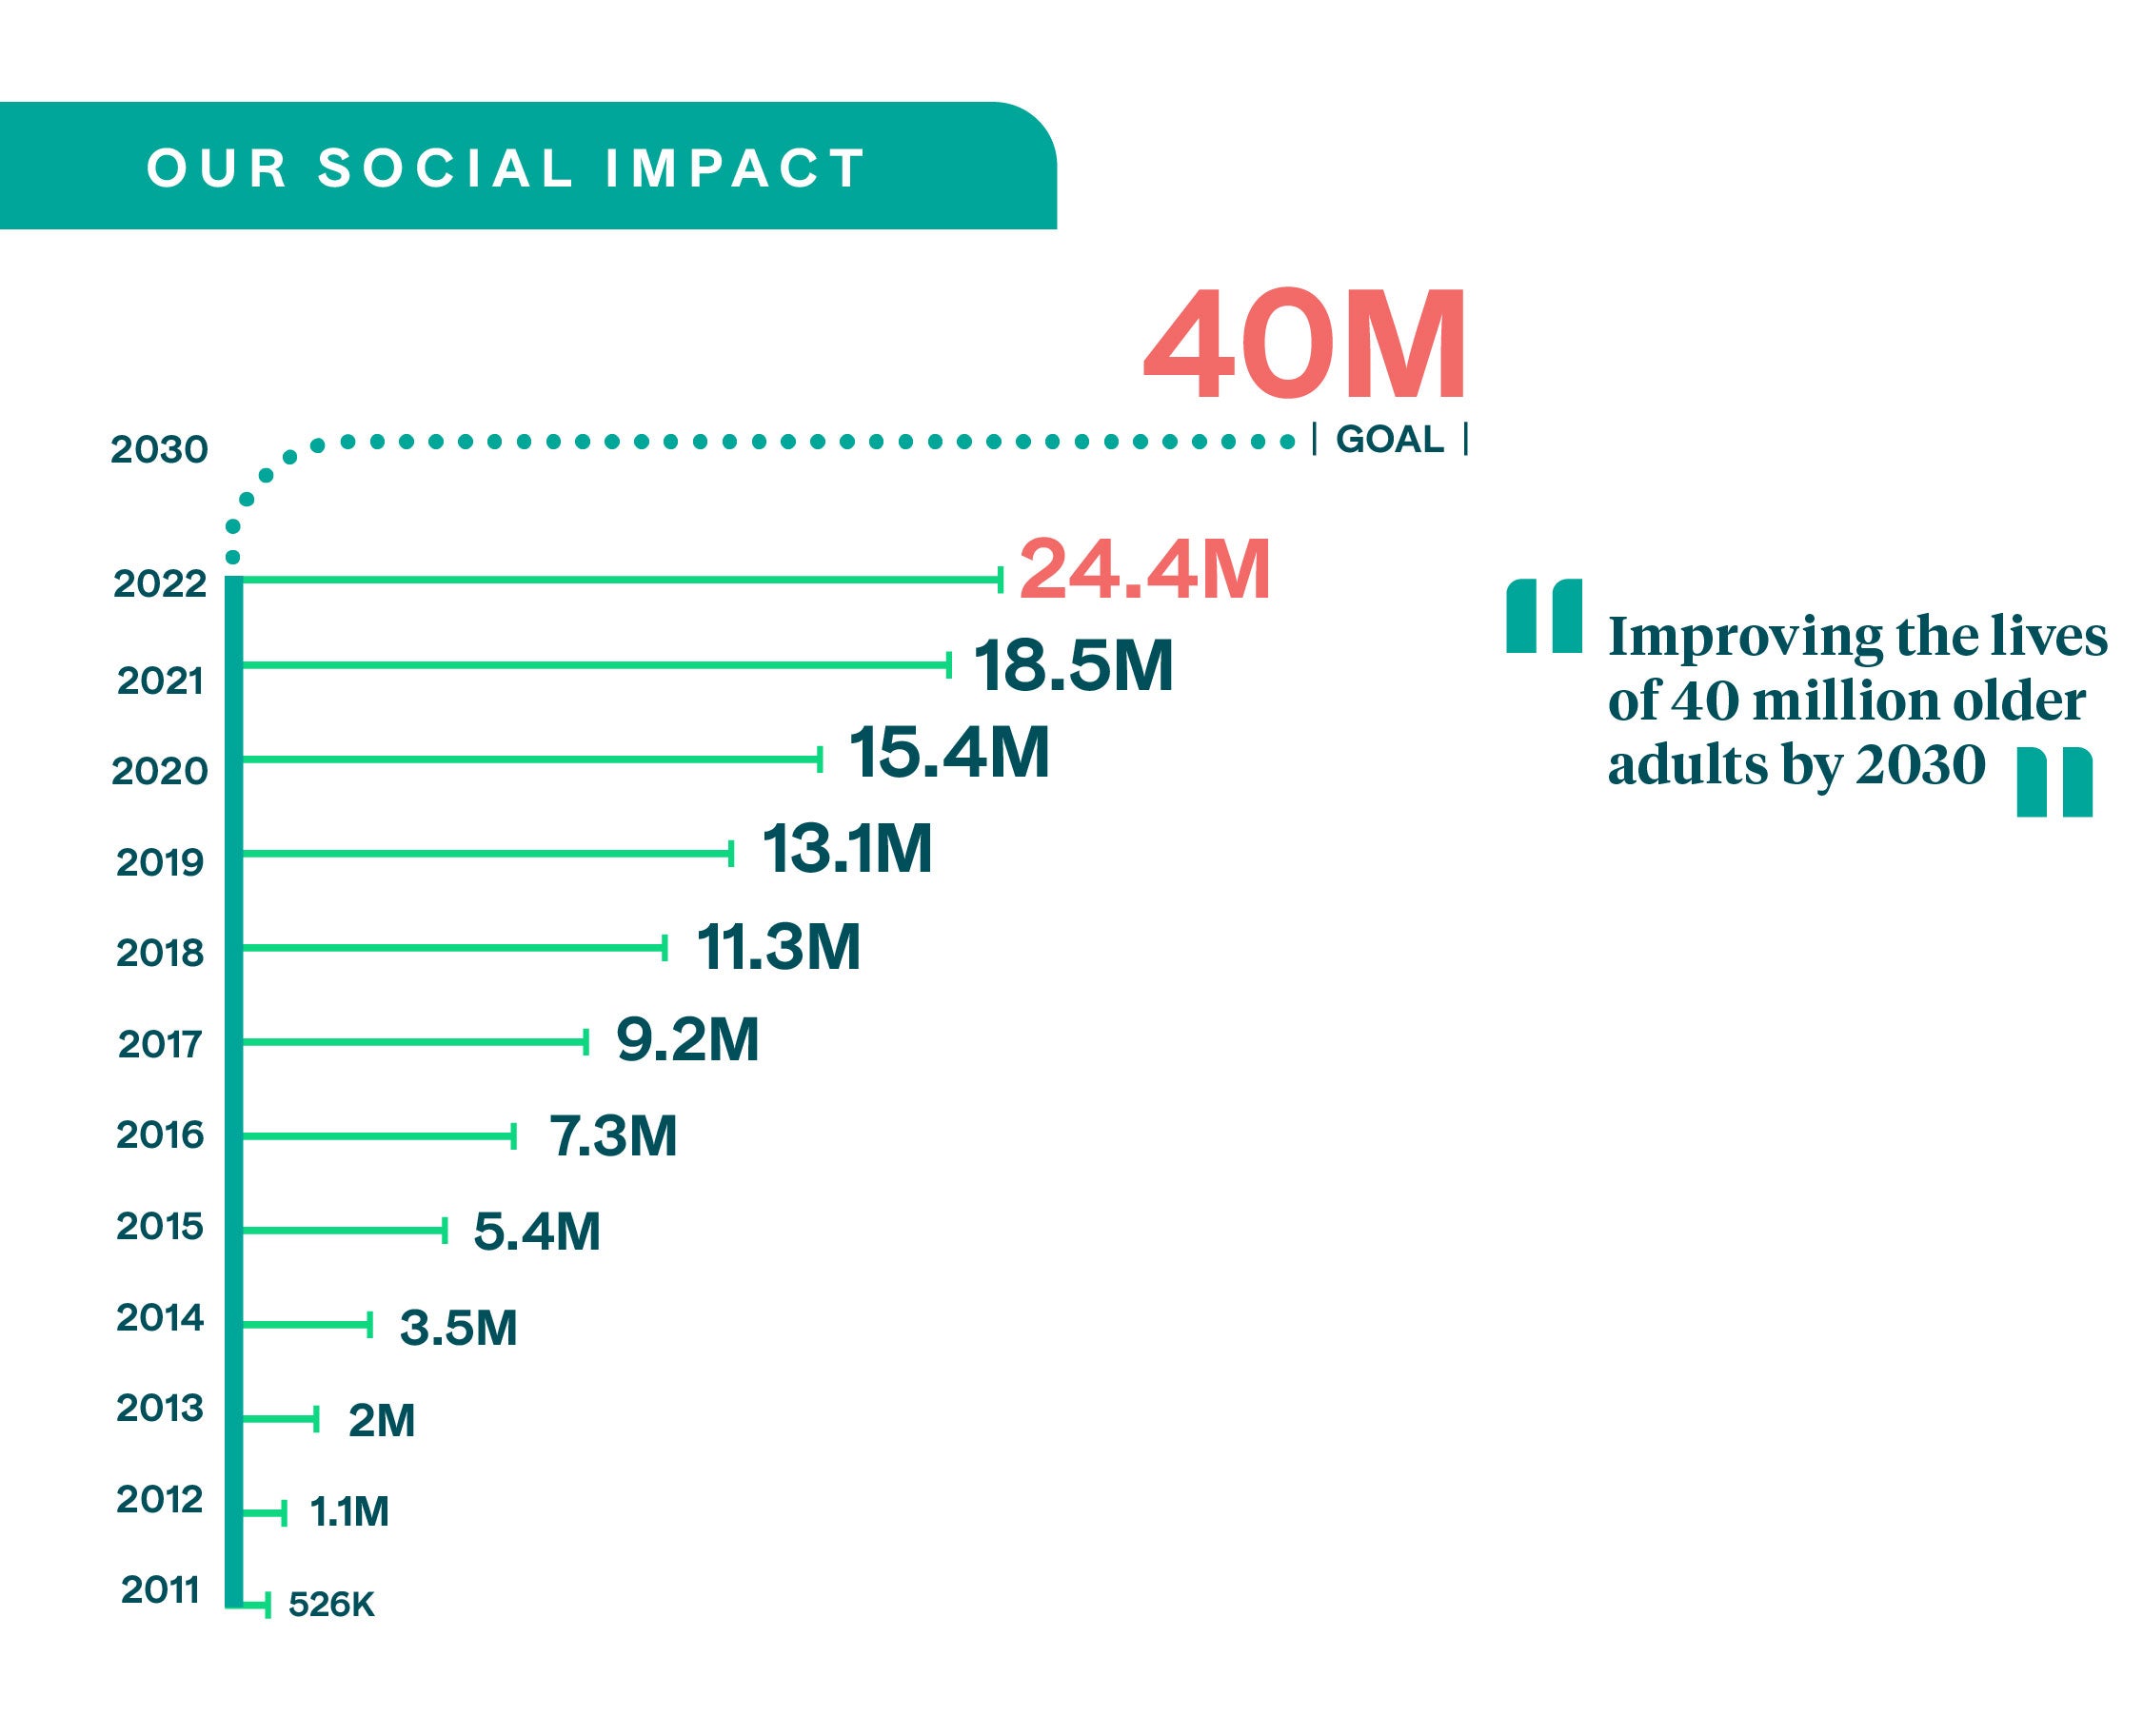 Our social impact